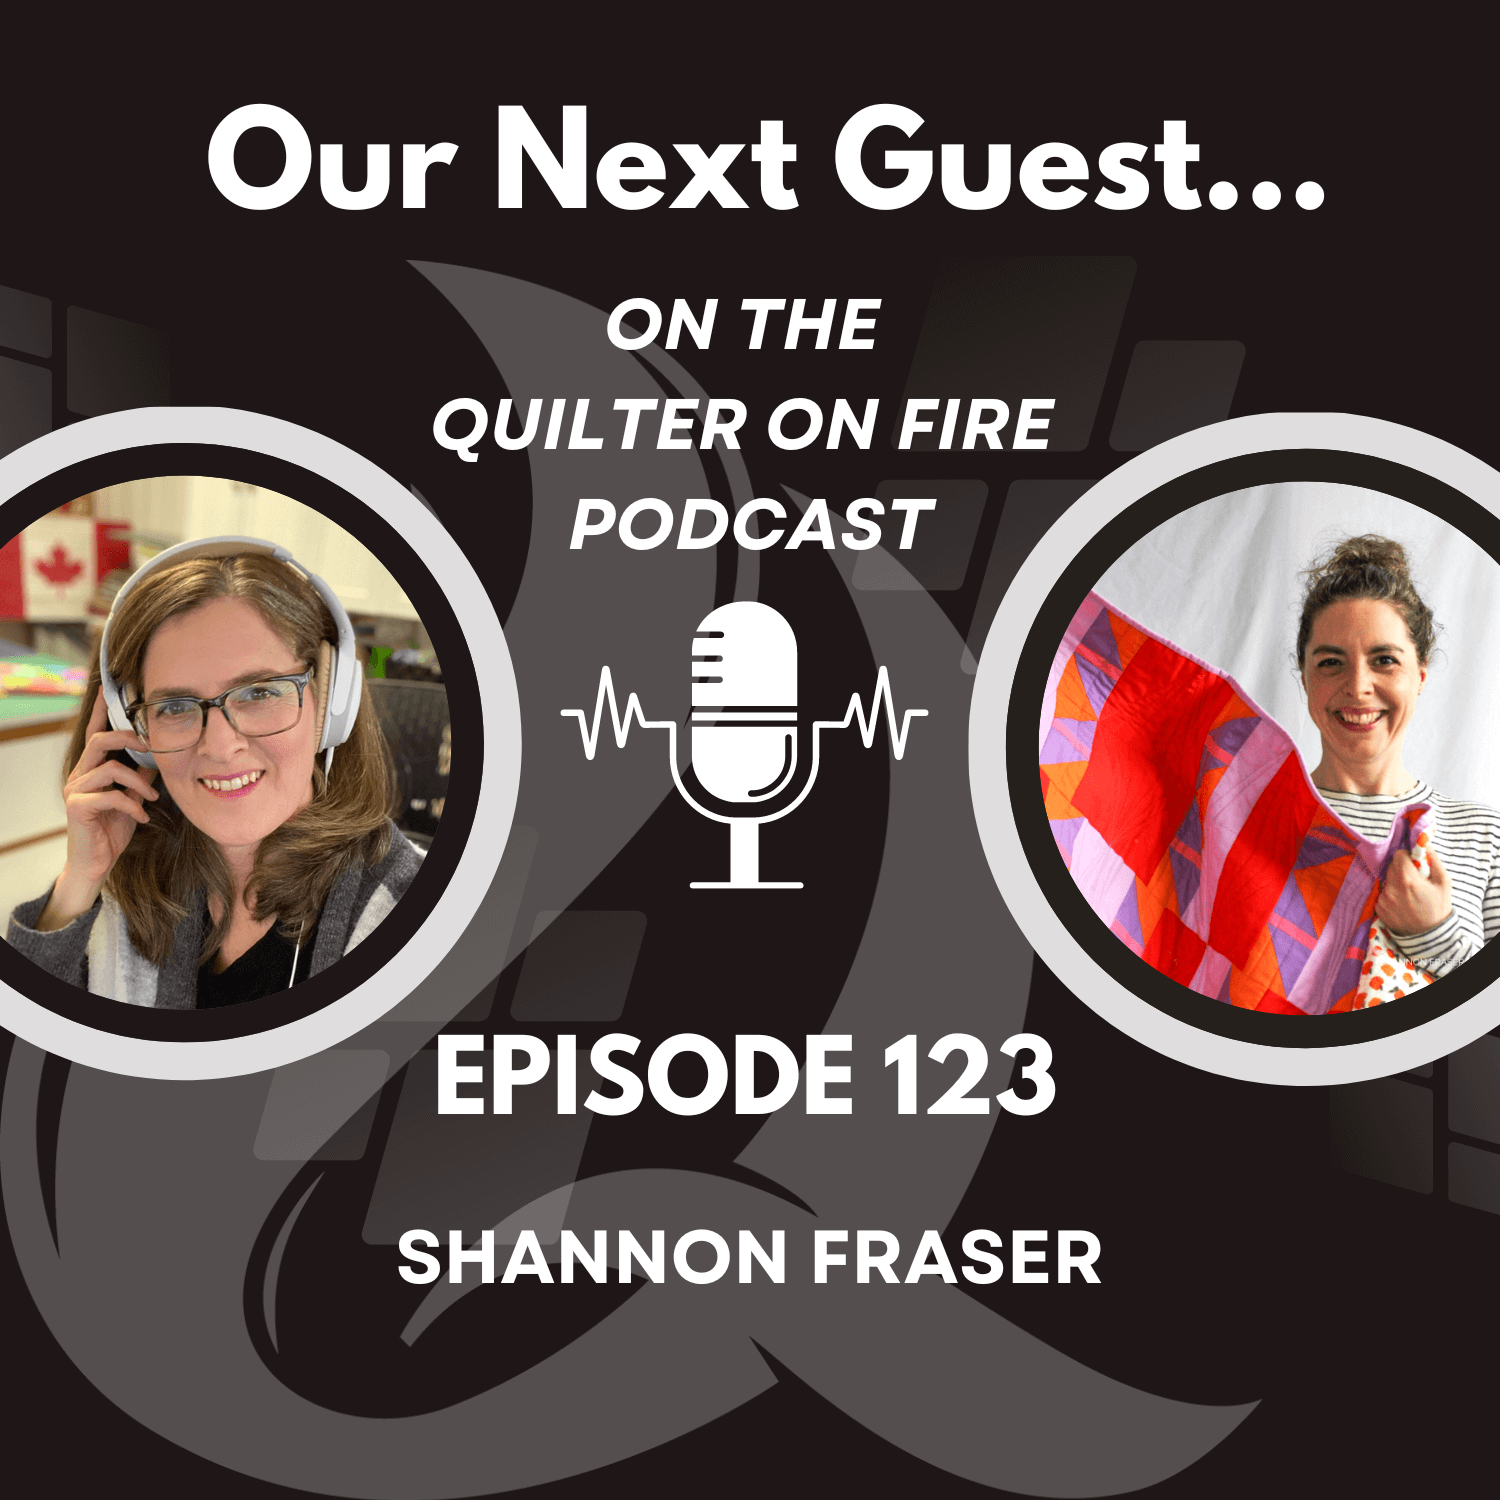 I'm a guest on the Quilter on Fire Podcast! Tune in to learn more about my creative journey, what my design process is, why I love quilting and where I'm heading next! #podcast #quilters #creativecommunity